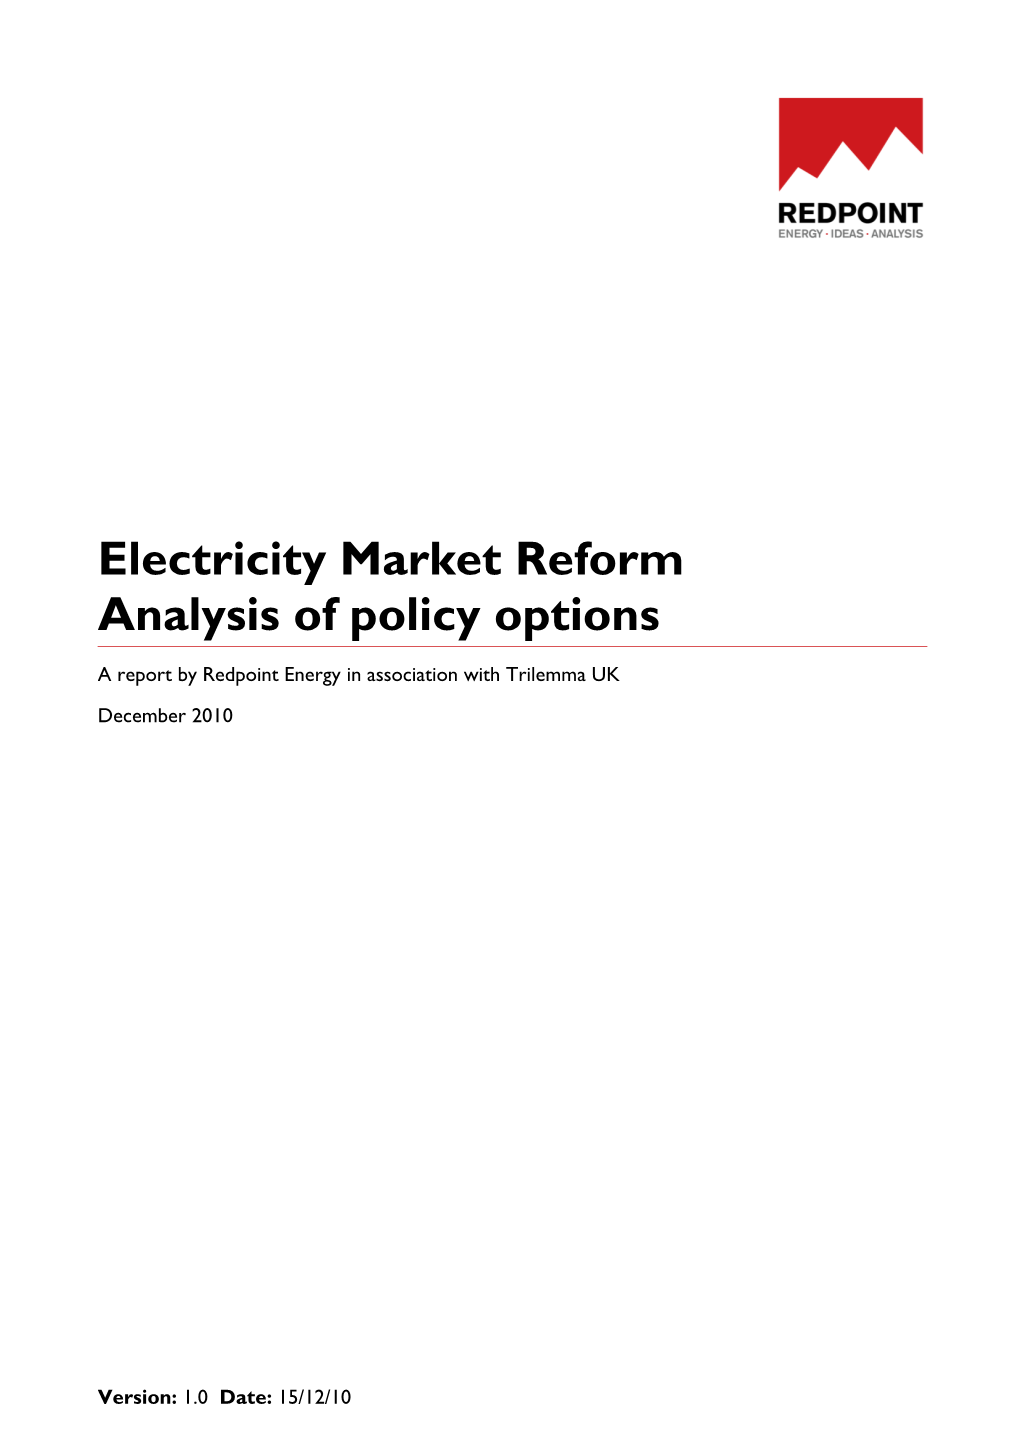 Electricity Market Reform Analysis of Policy Options